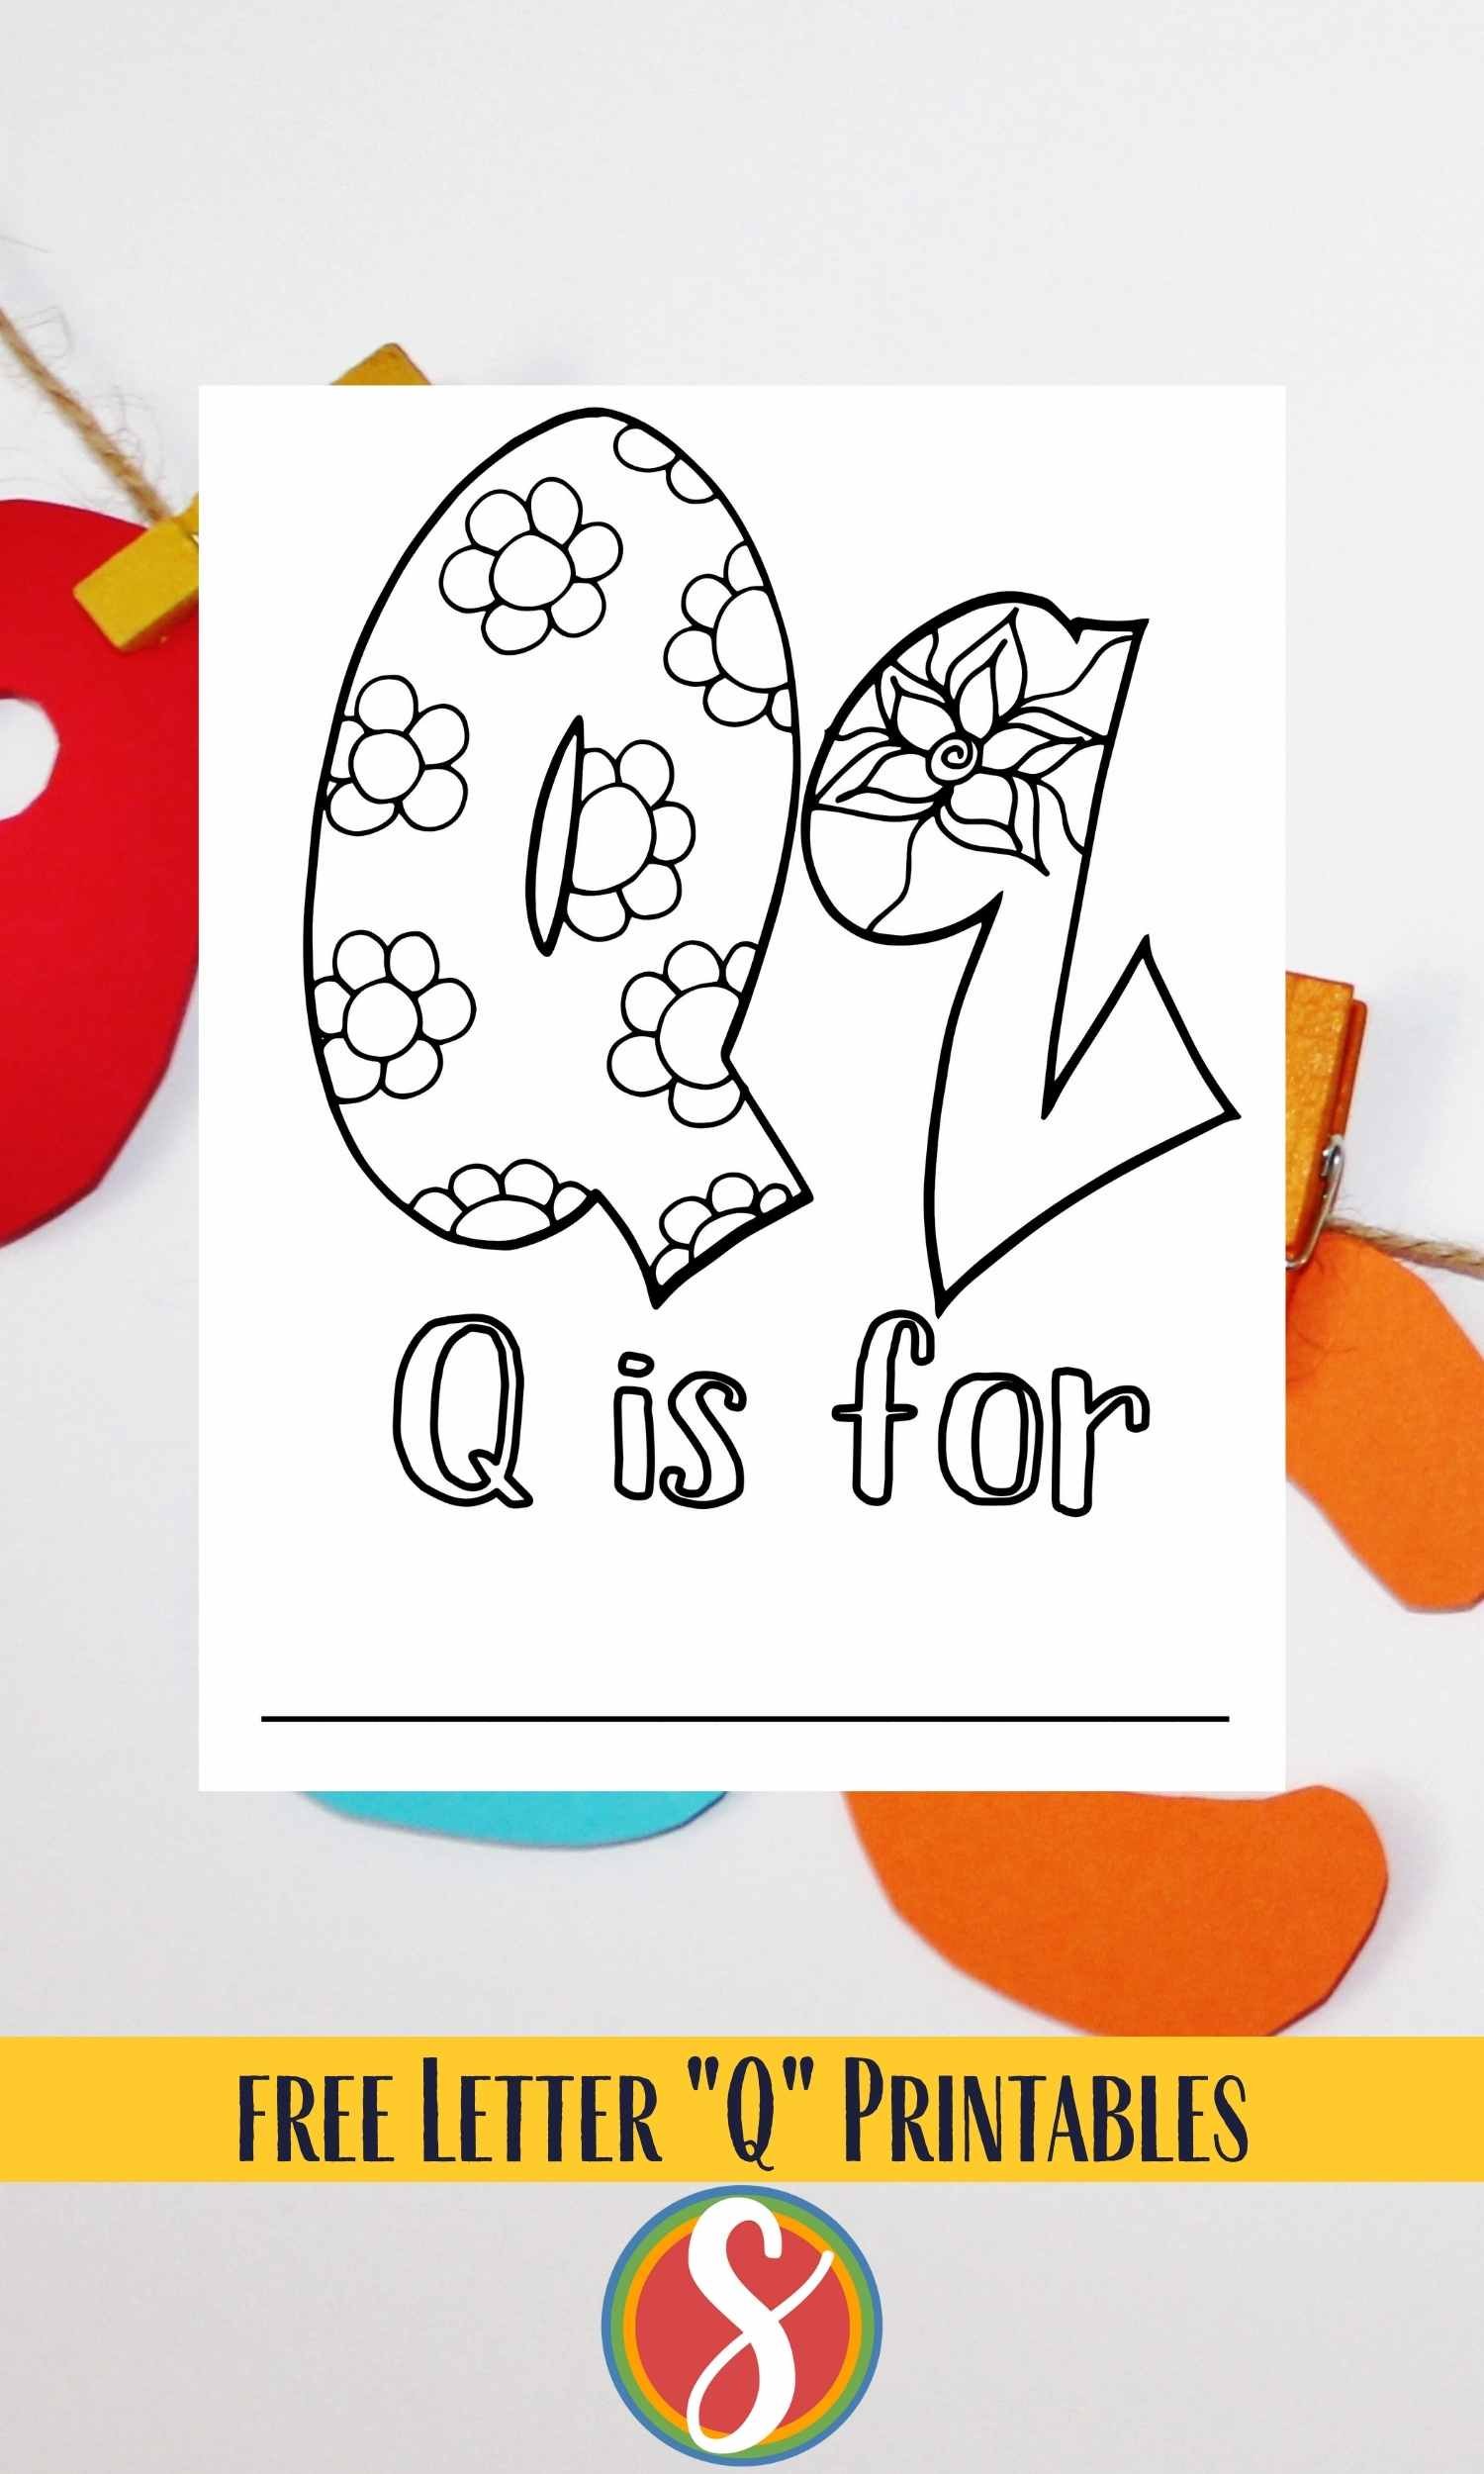 Bubble letters "Qq" with flowers inside to color